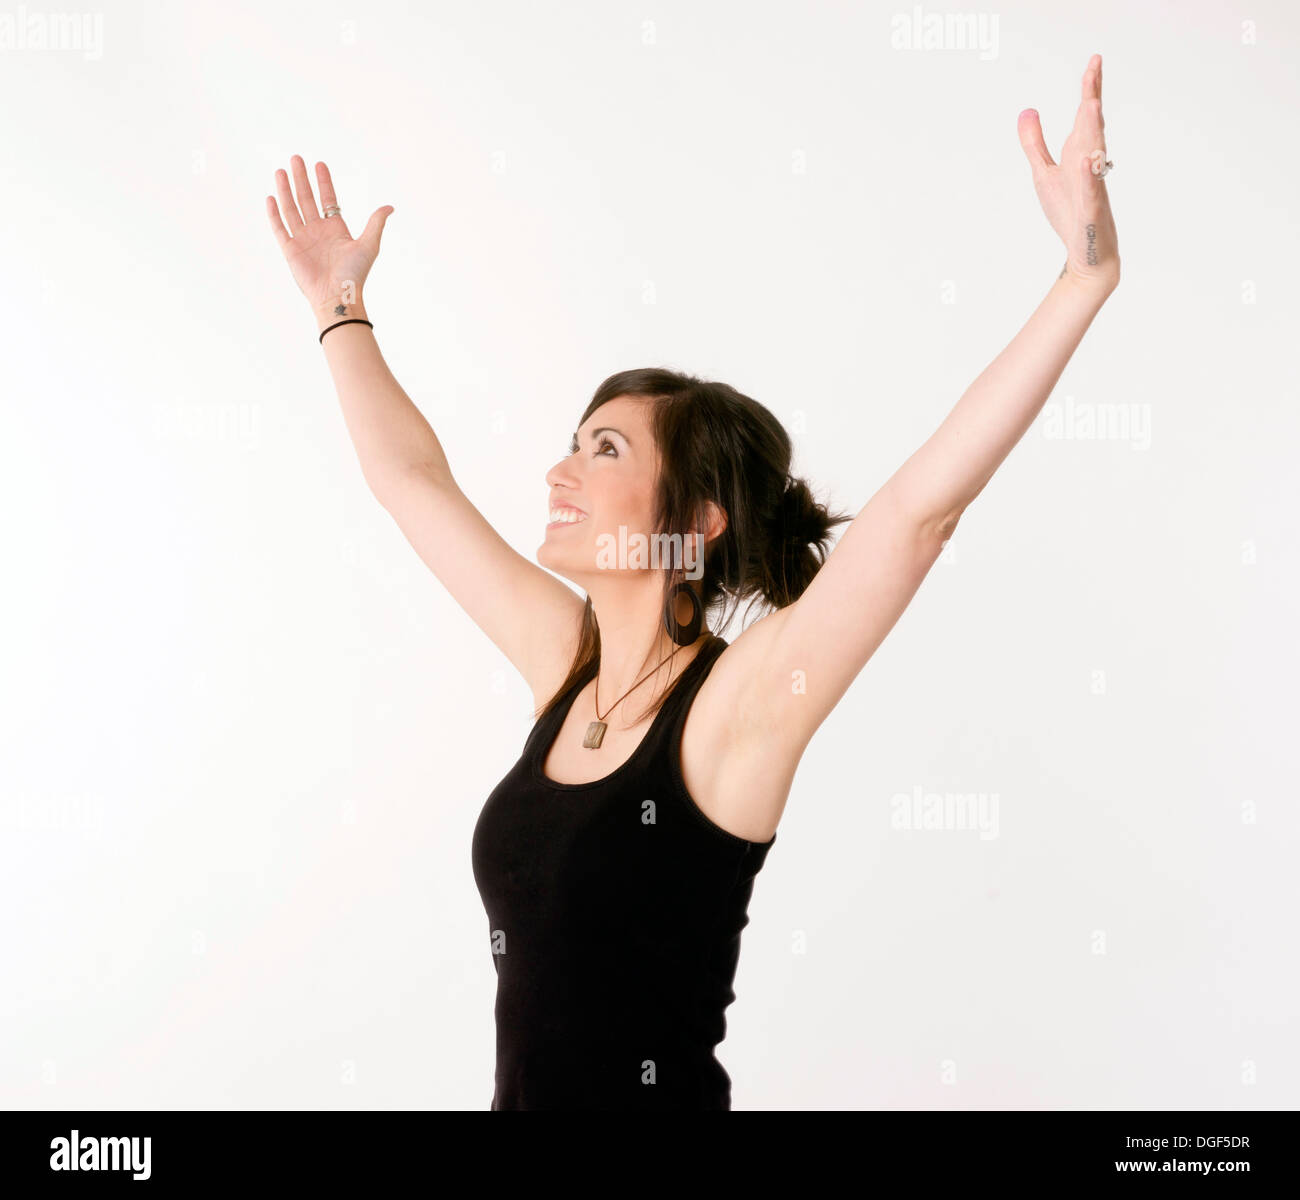 Woman motions towards the sky arms outstretched Stock Photo